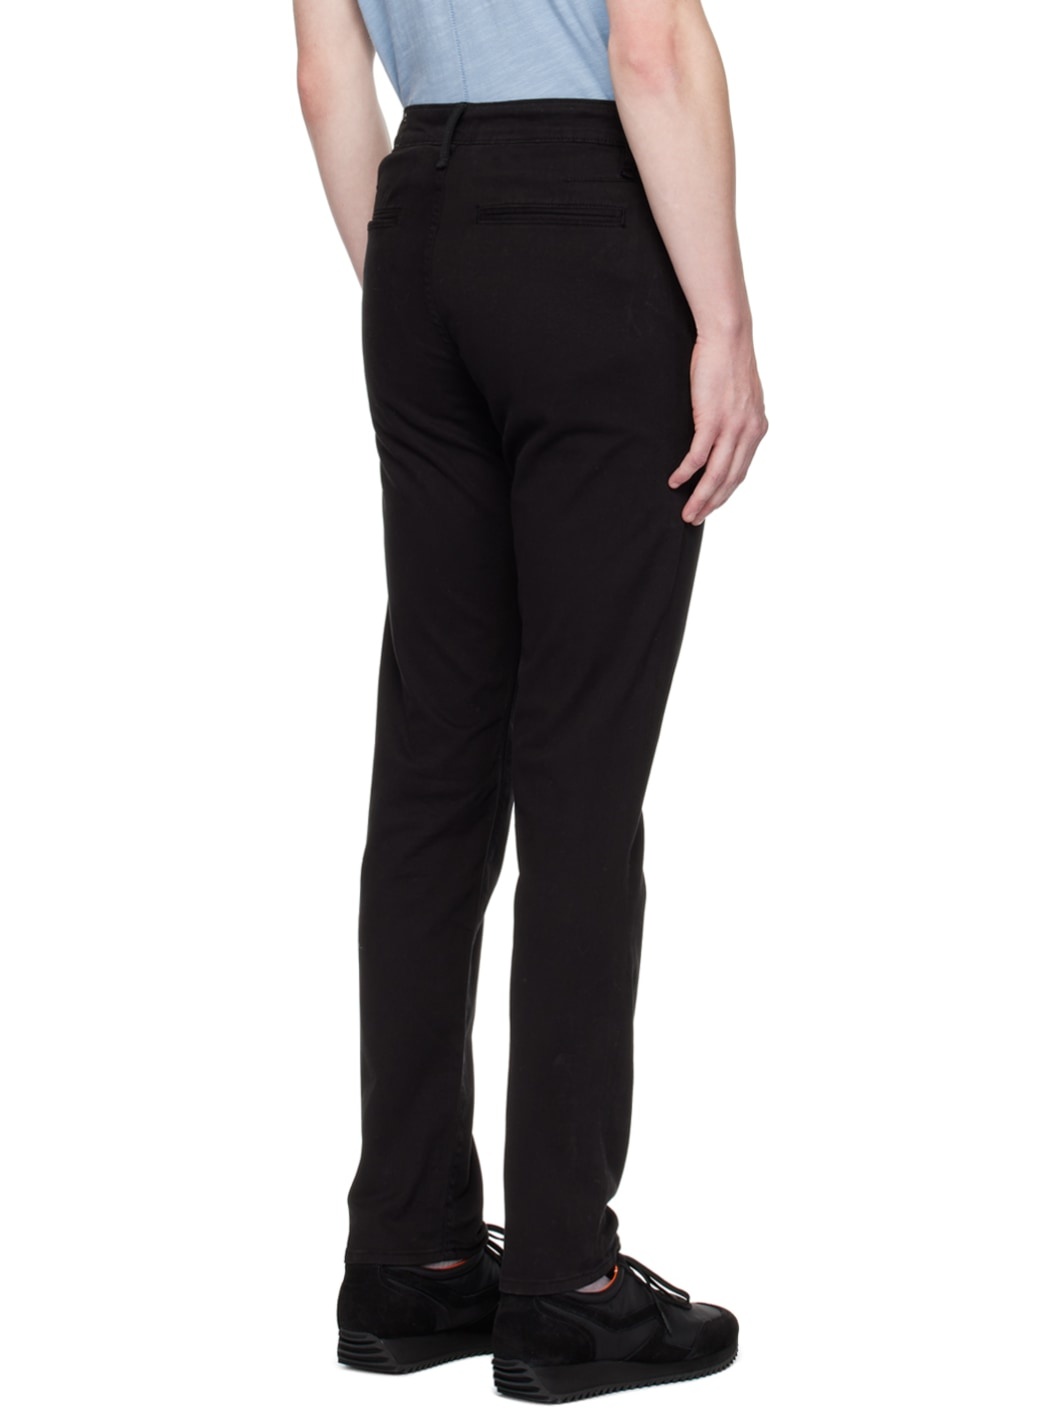 Black Fit 2 Trousers - 3